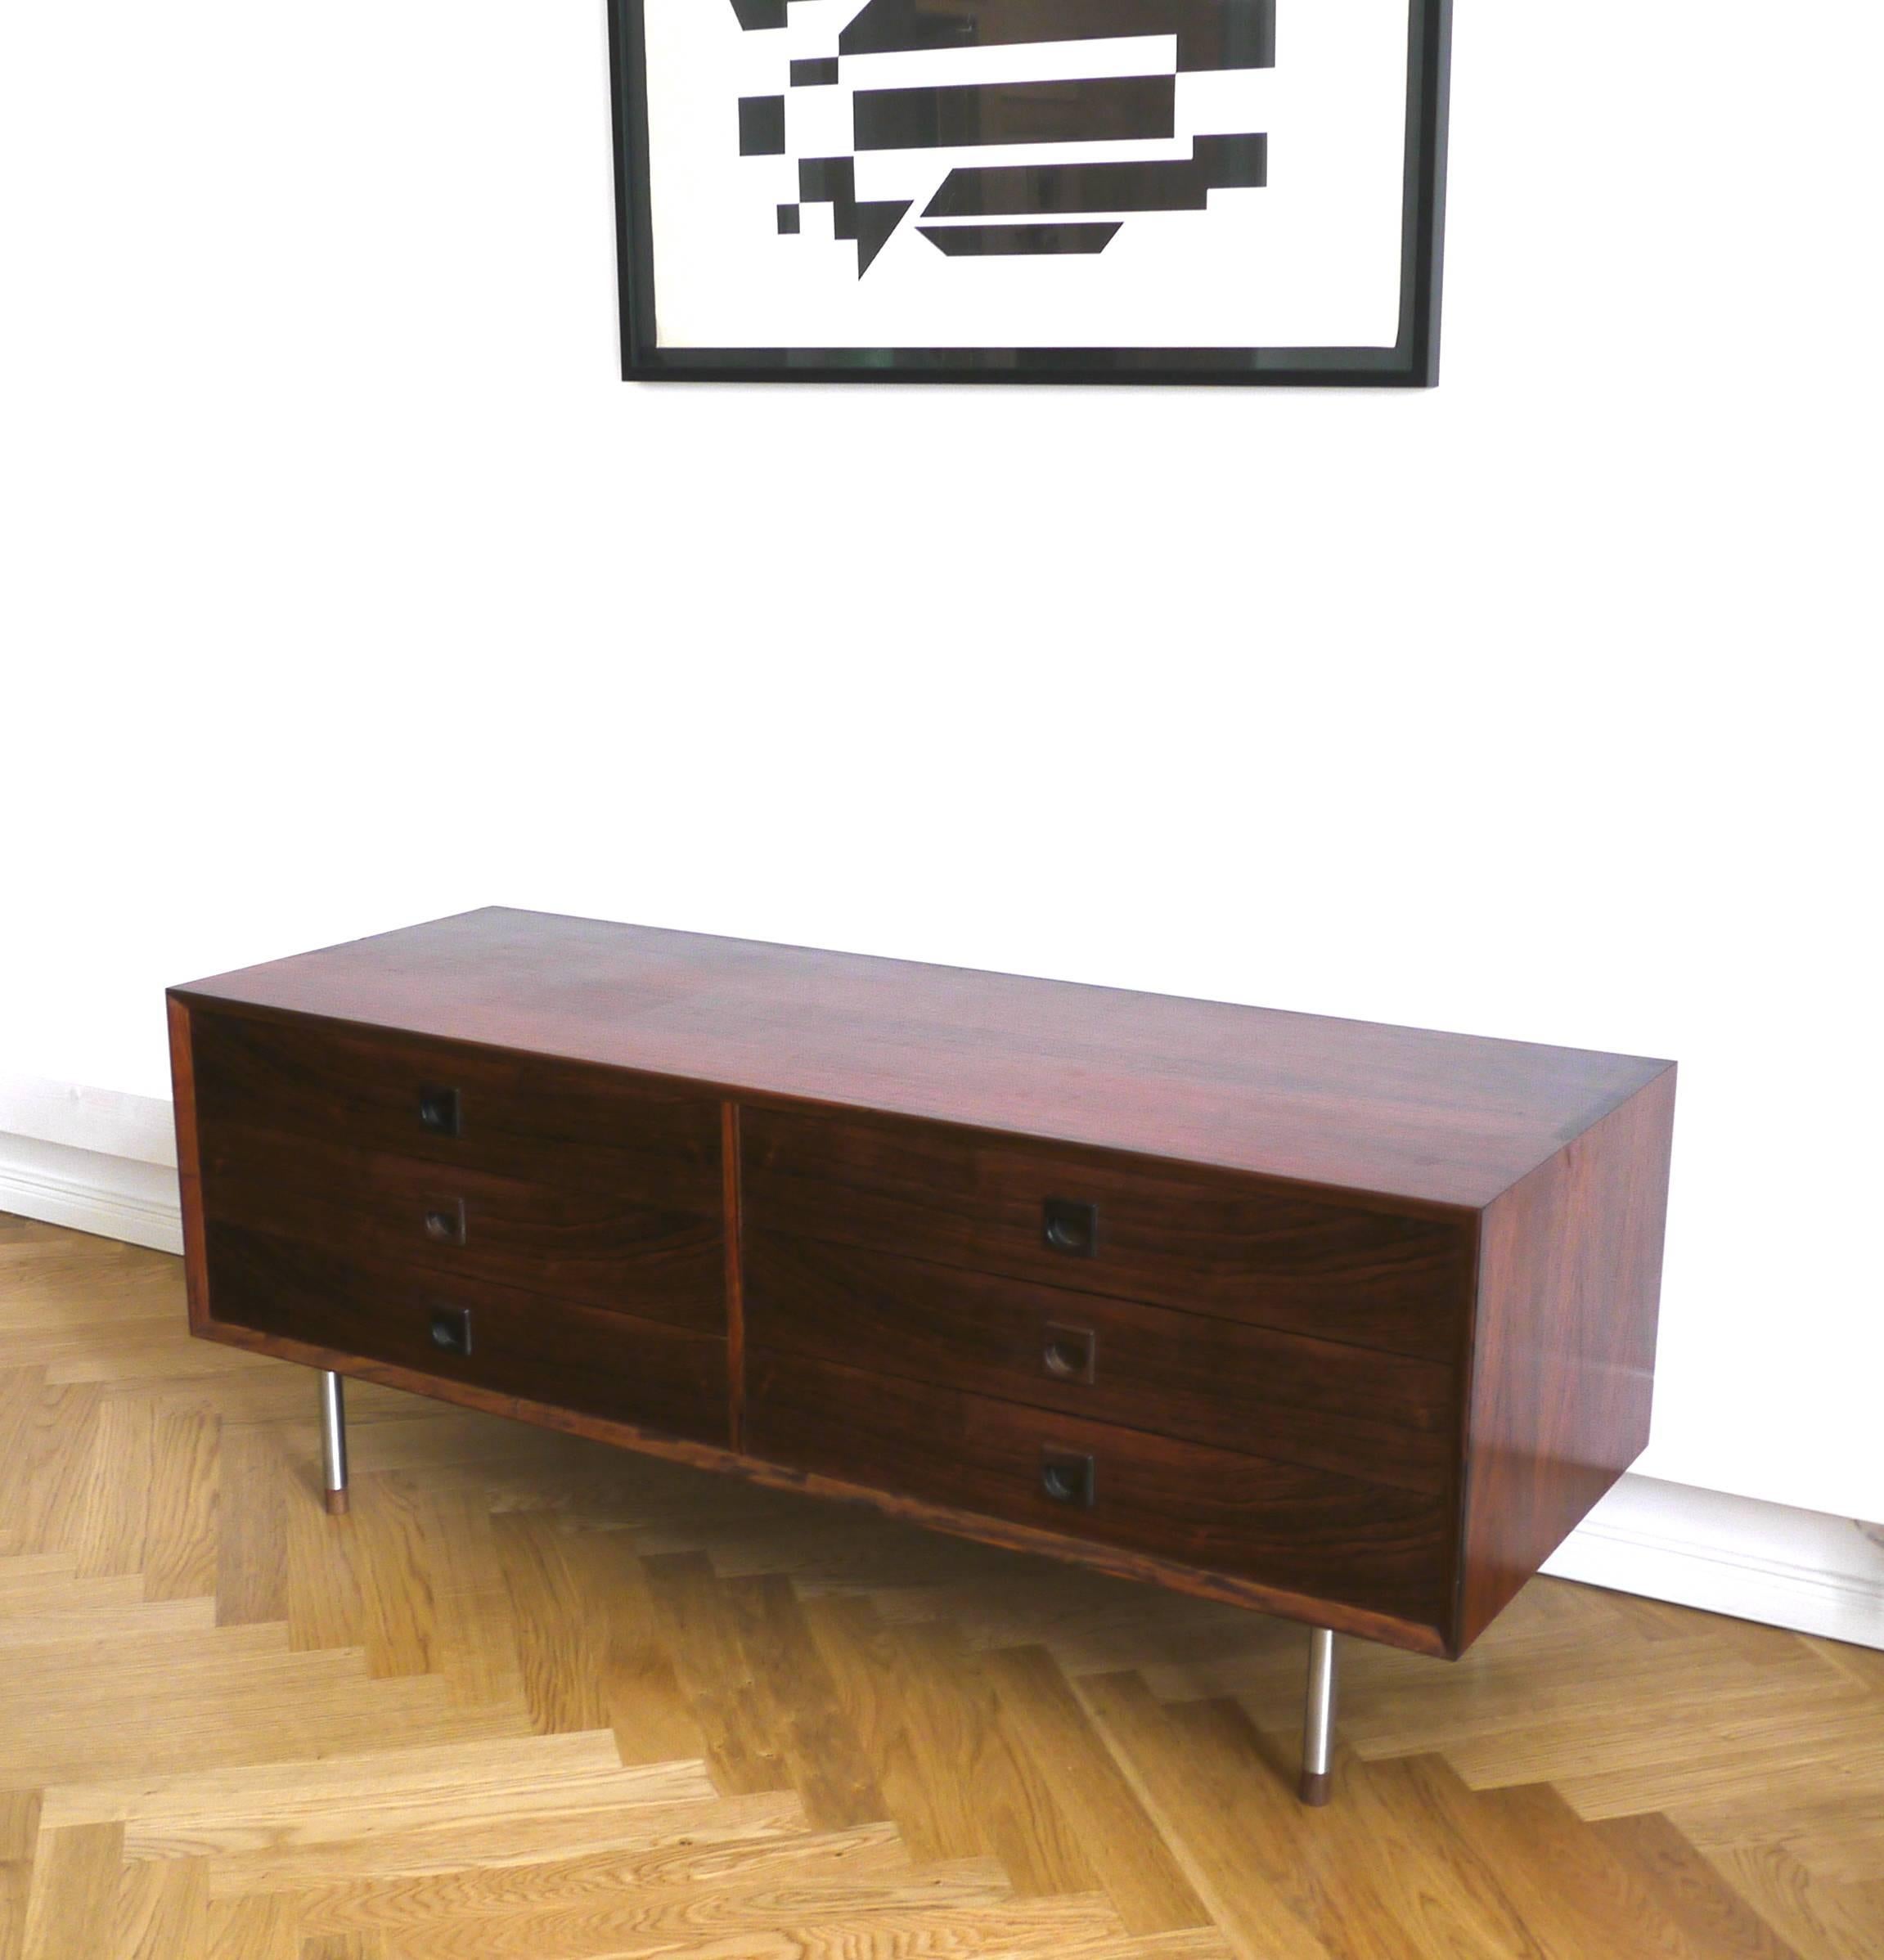 This compact lower sideboard or chest of drawer is made in 1960s in Denmark by Brouer Møbelfabrik. The rosewood veneer shows a remarkable wood grain. The simple and classic corpus features six drawers and organic handles made in rosewood. The